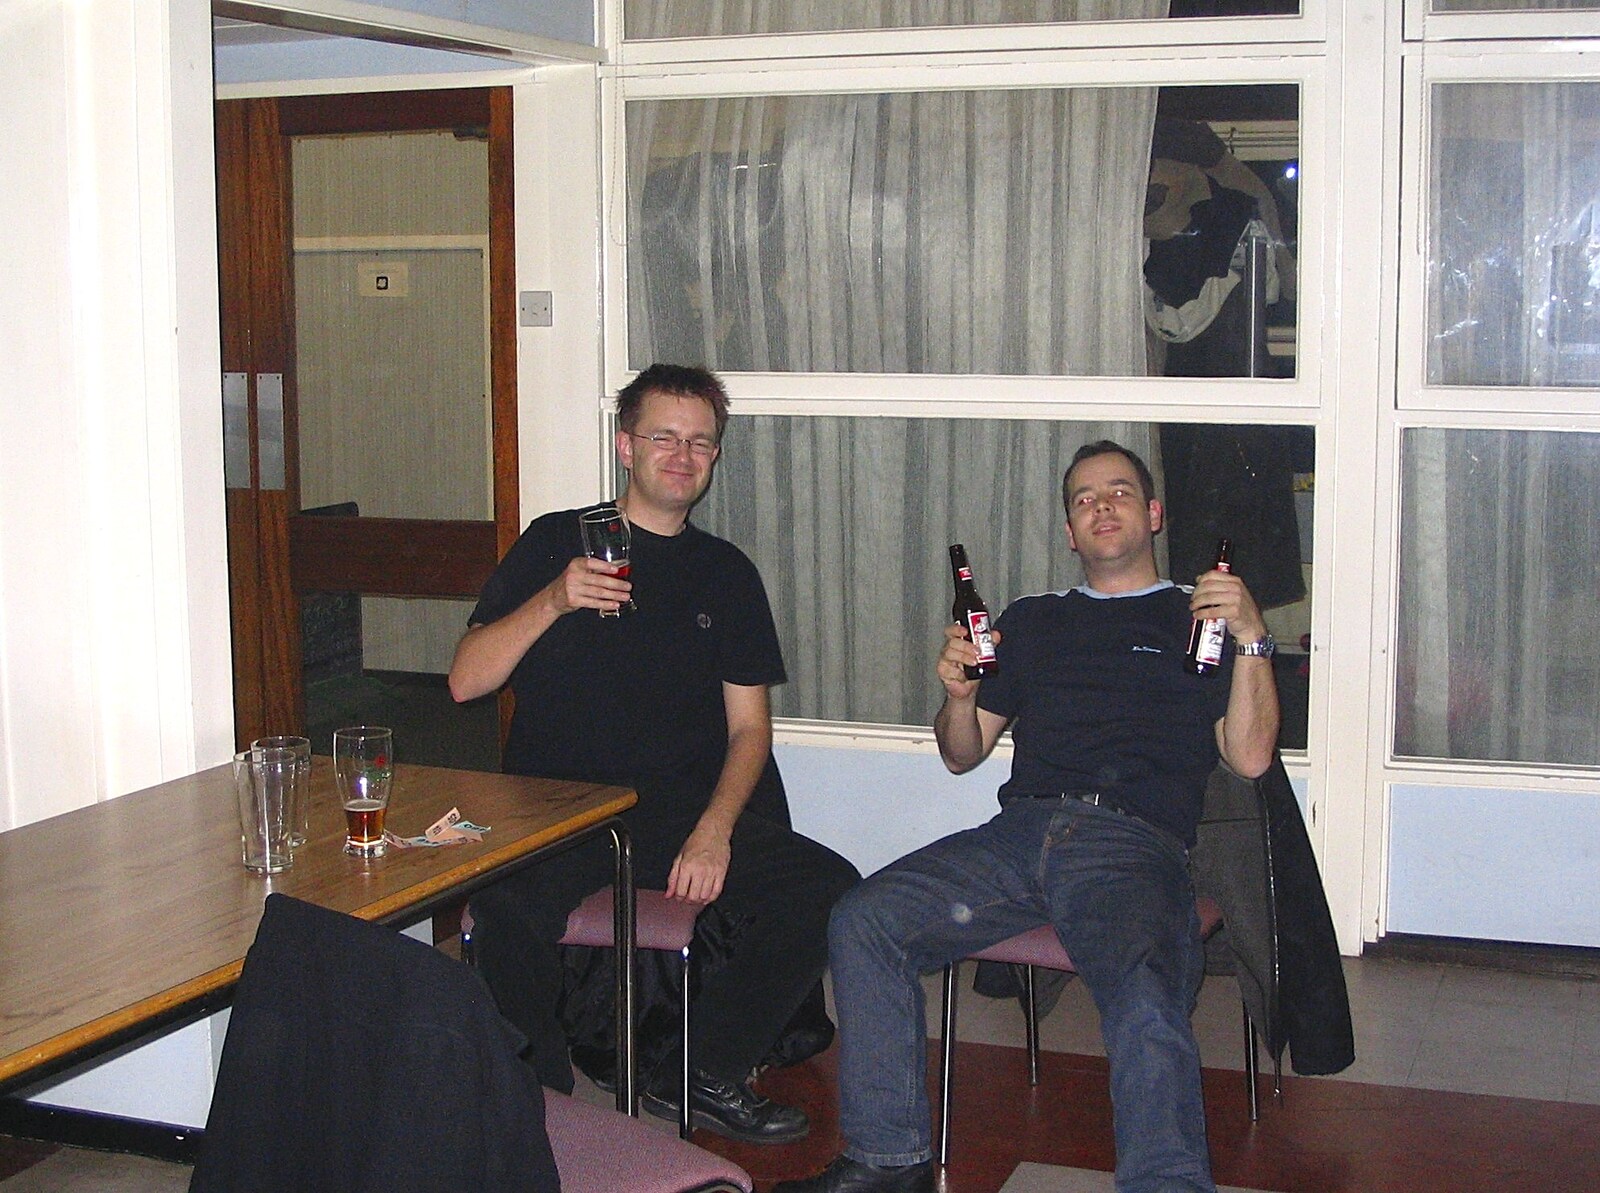 Nosher and Russell, who's on the bottles from A CISU Blues Festival at the SCC Social Club, Ipswich, Suffolk - 27th November 2004